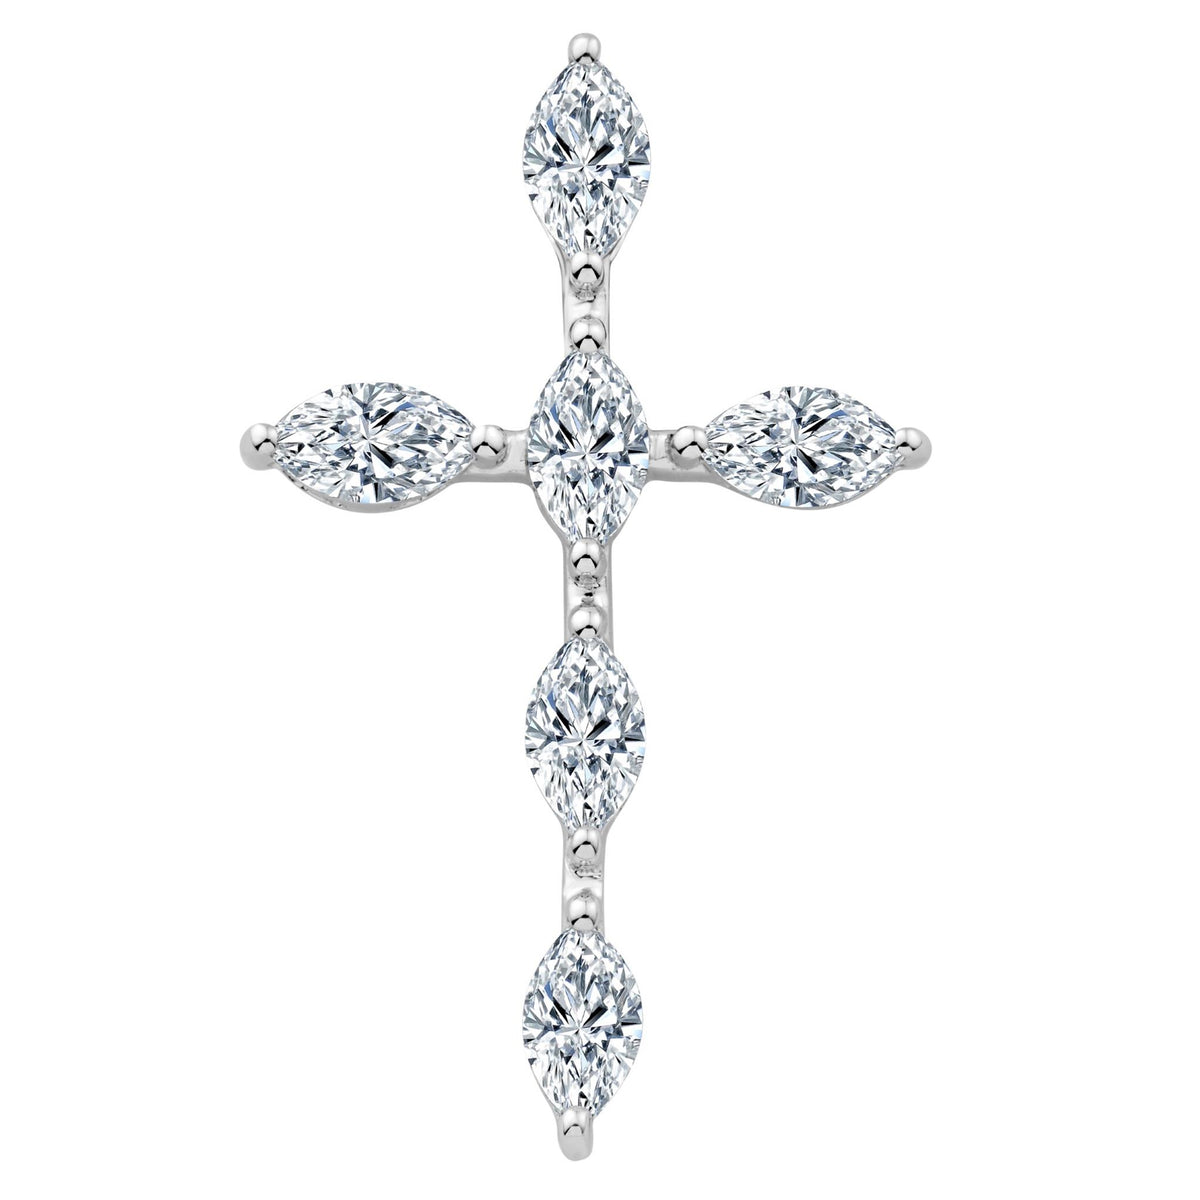 14Kt White Gold Cross Pendant with 1.27cttw Natural Marquise Diamonds